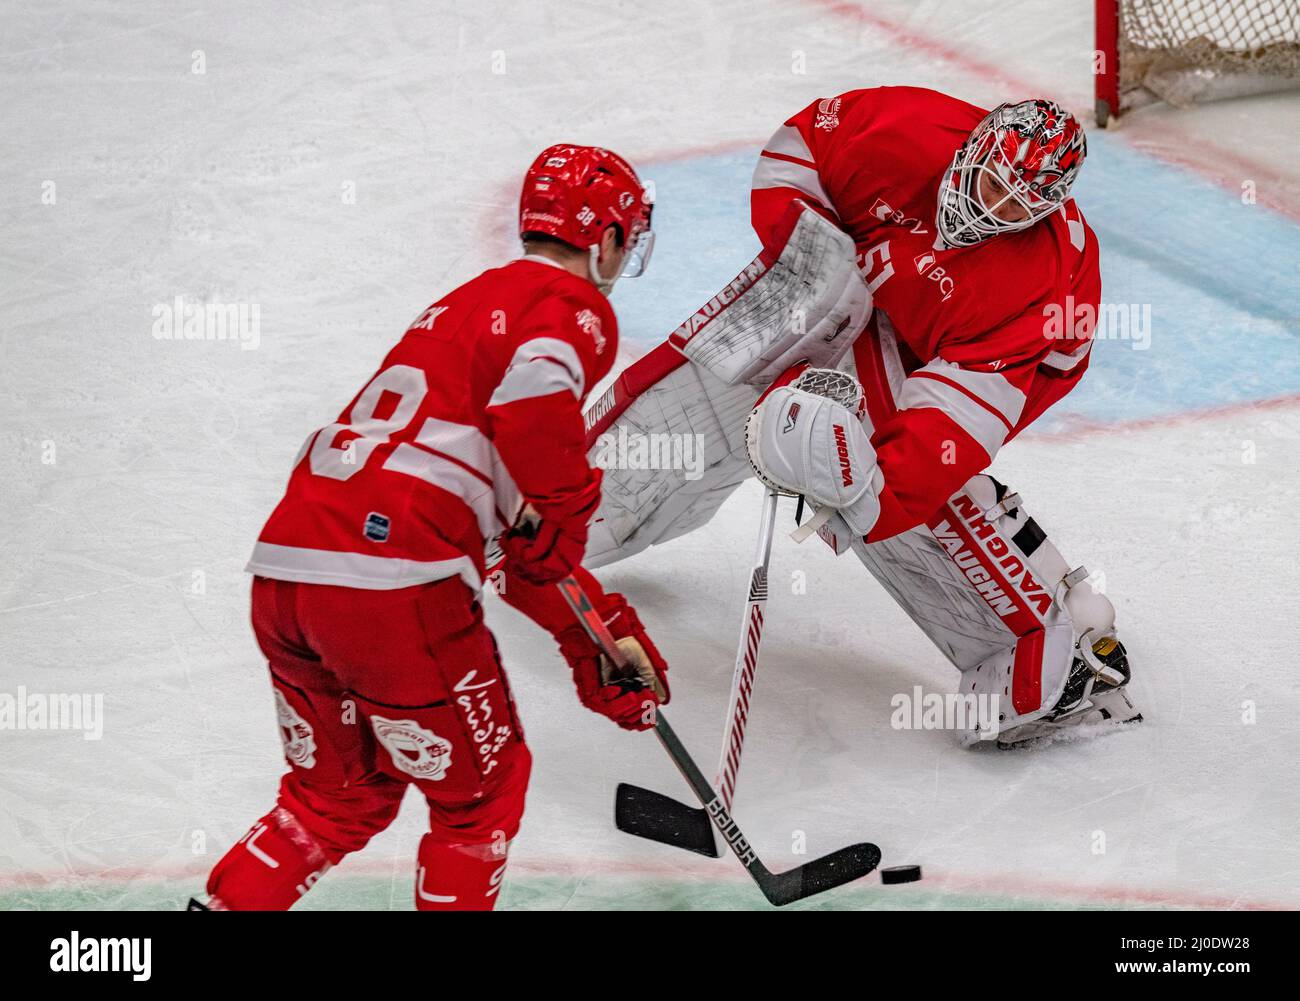 Lausanne, Vaudoise Arena, Switzerland. 18th Mar, 2022: Tobias Stephan (goalkeeper) of Lausanne Hc (51) is in action during the Pre-playoffs, Acte 1 of the 2021-2022 Swiss National League Season with the Lausanne HC and HC Ambri-Piotta. Credit: Eric Dubost/Alamy Live News Stock Photo